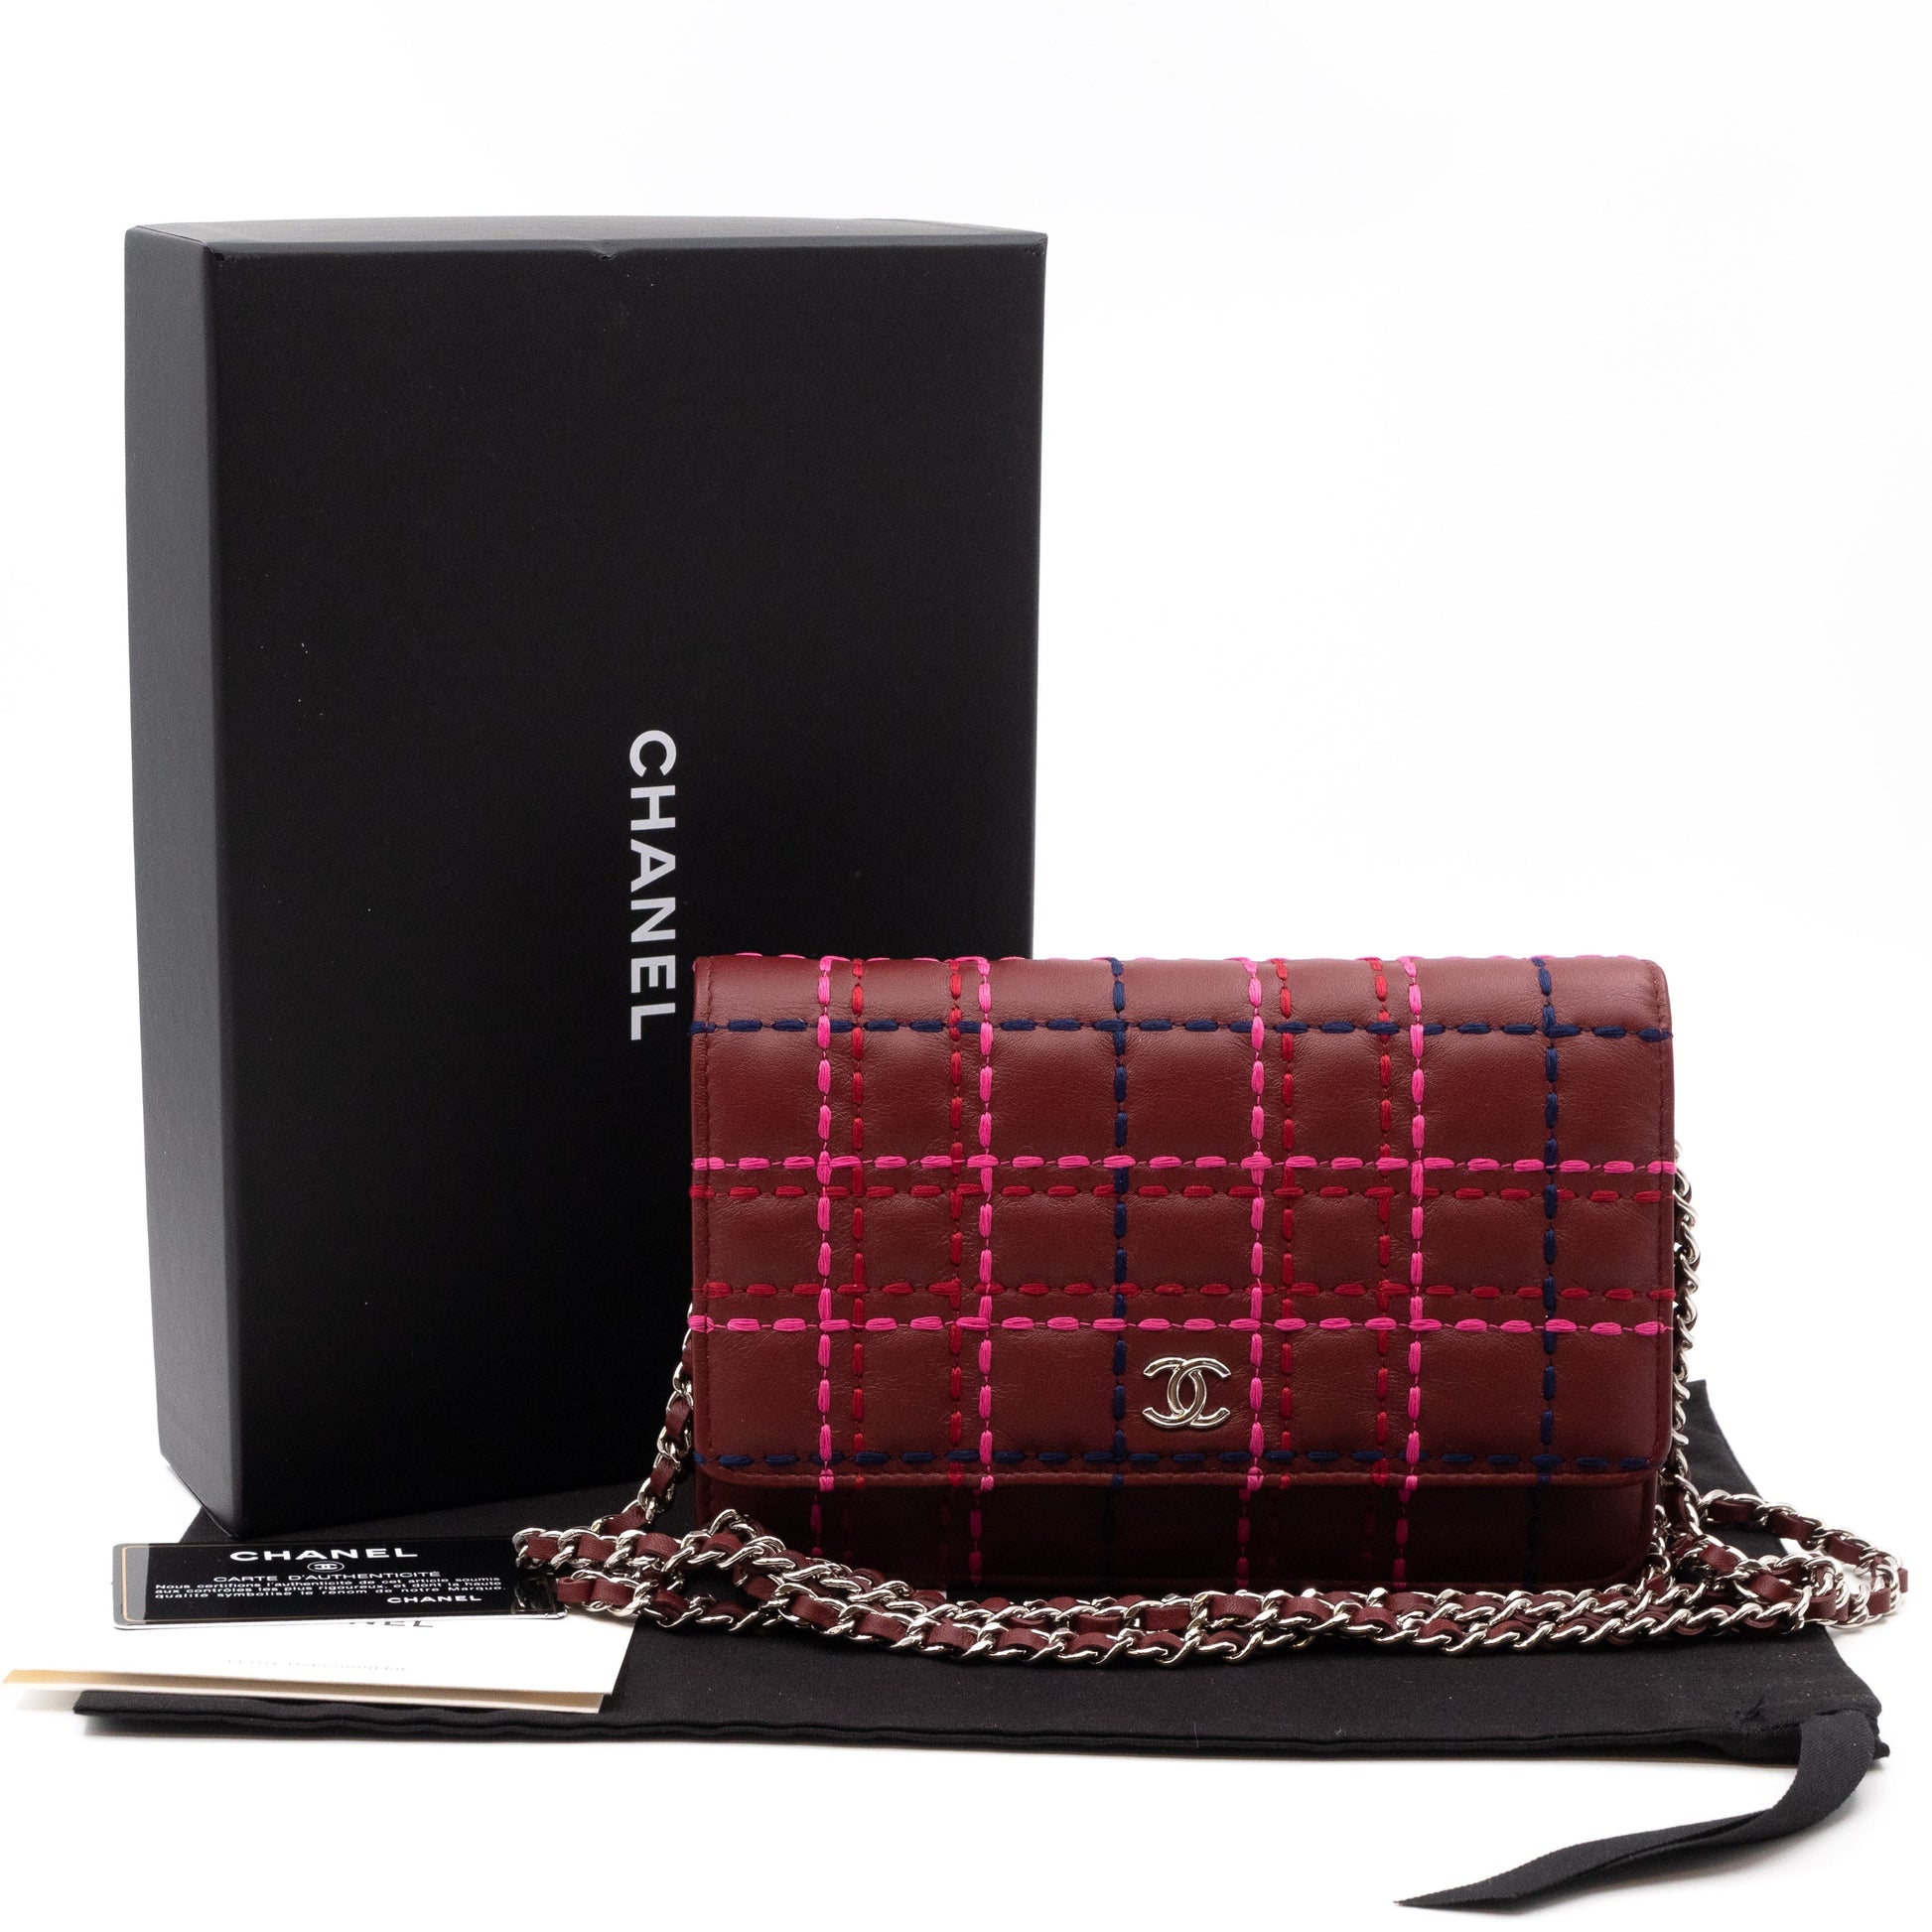 Chanel – Chanel Classic Wallet On Chain Burgundy Leather Square